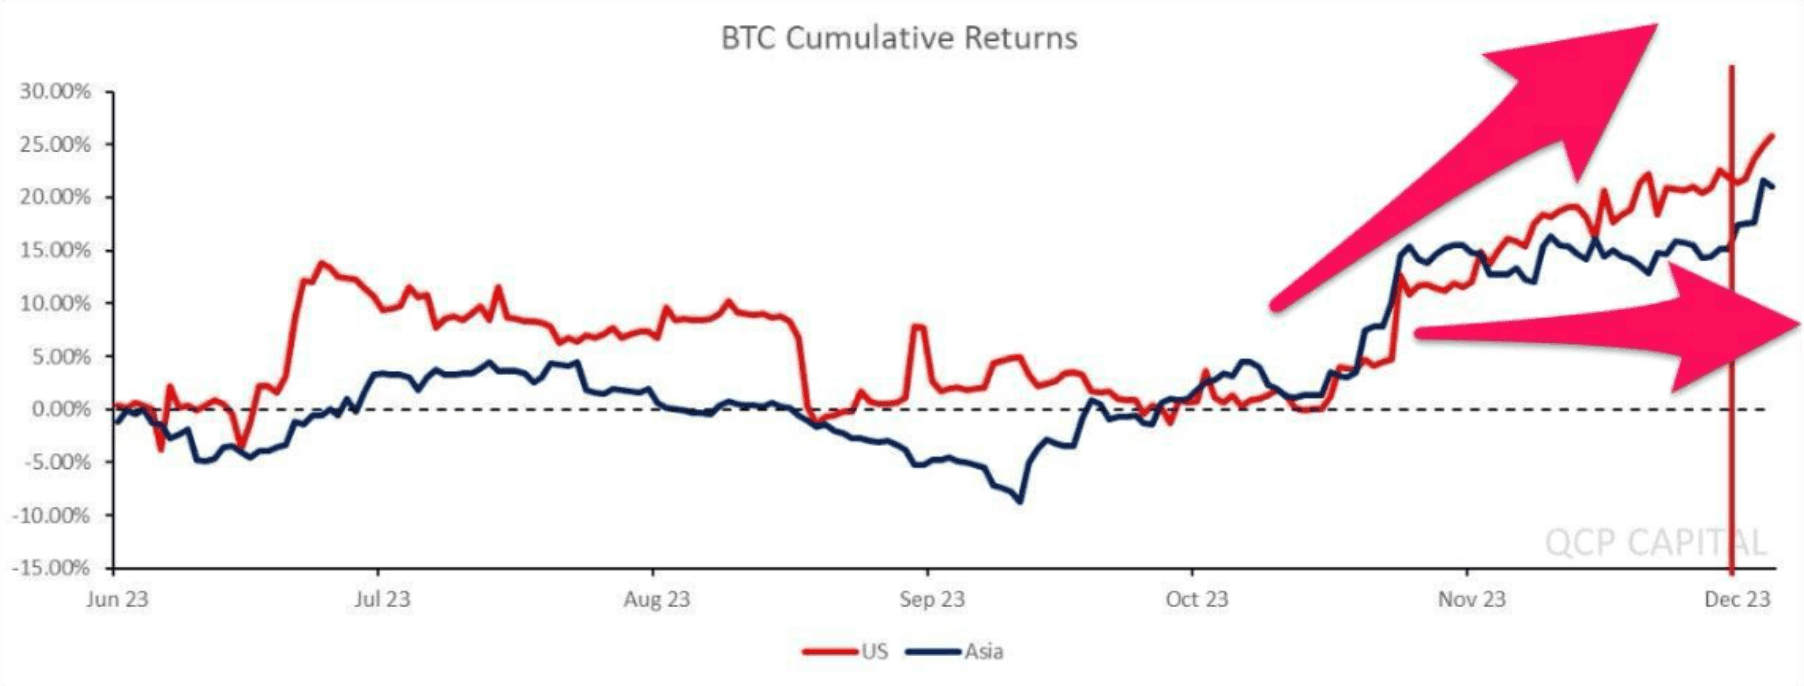 Chart 1: BTC Cumulative Returns - Red: US Hours, Blue: Asia Hours (Source: QCP Insights)